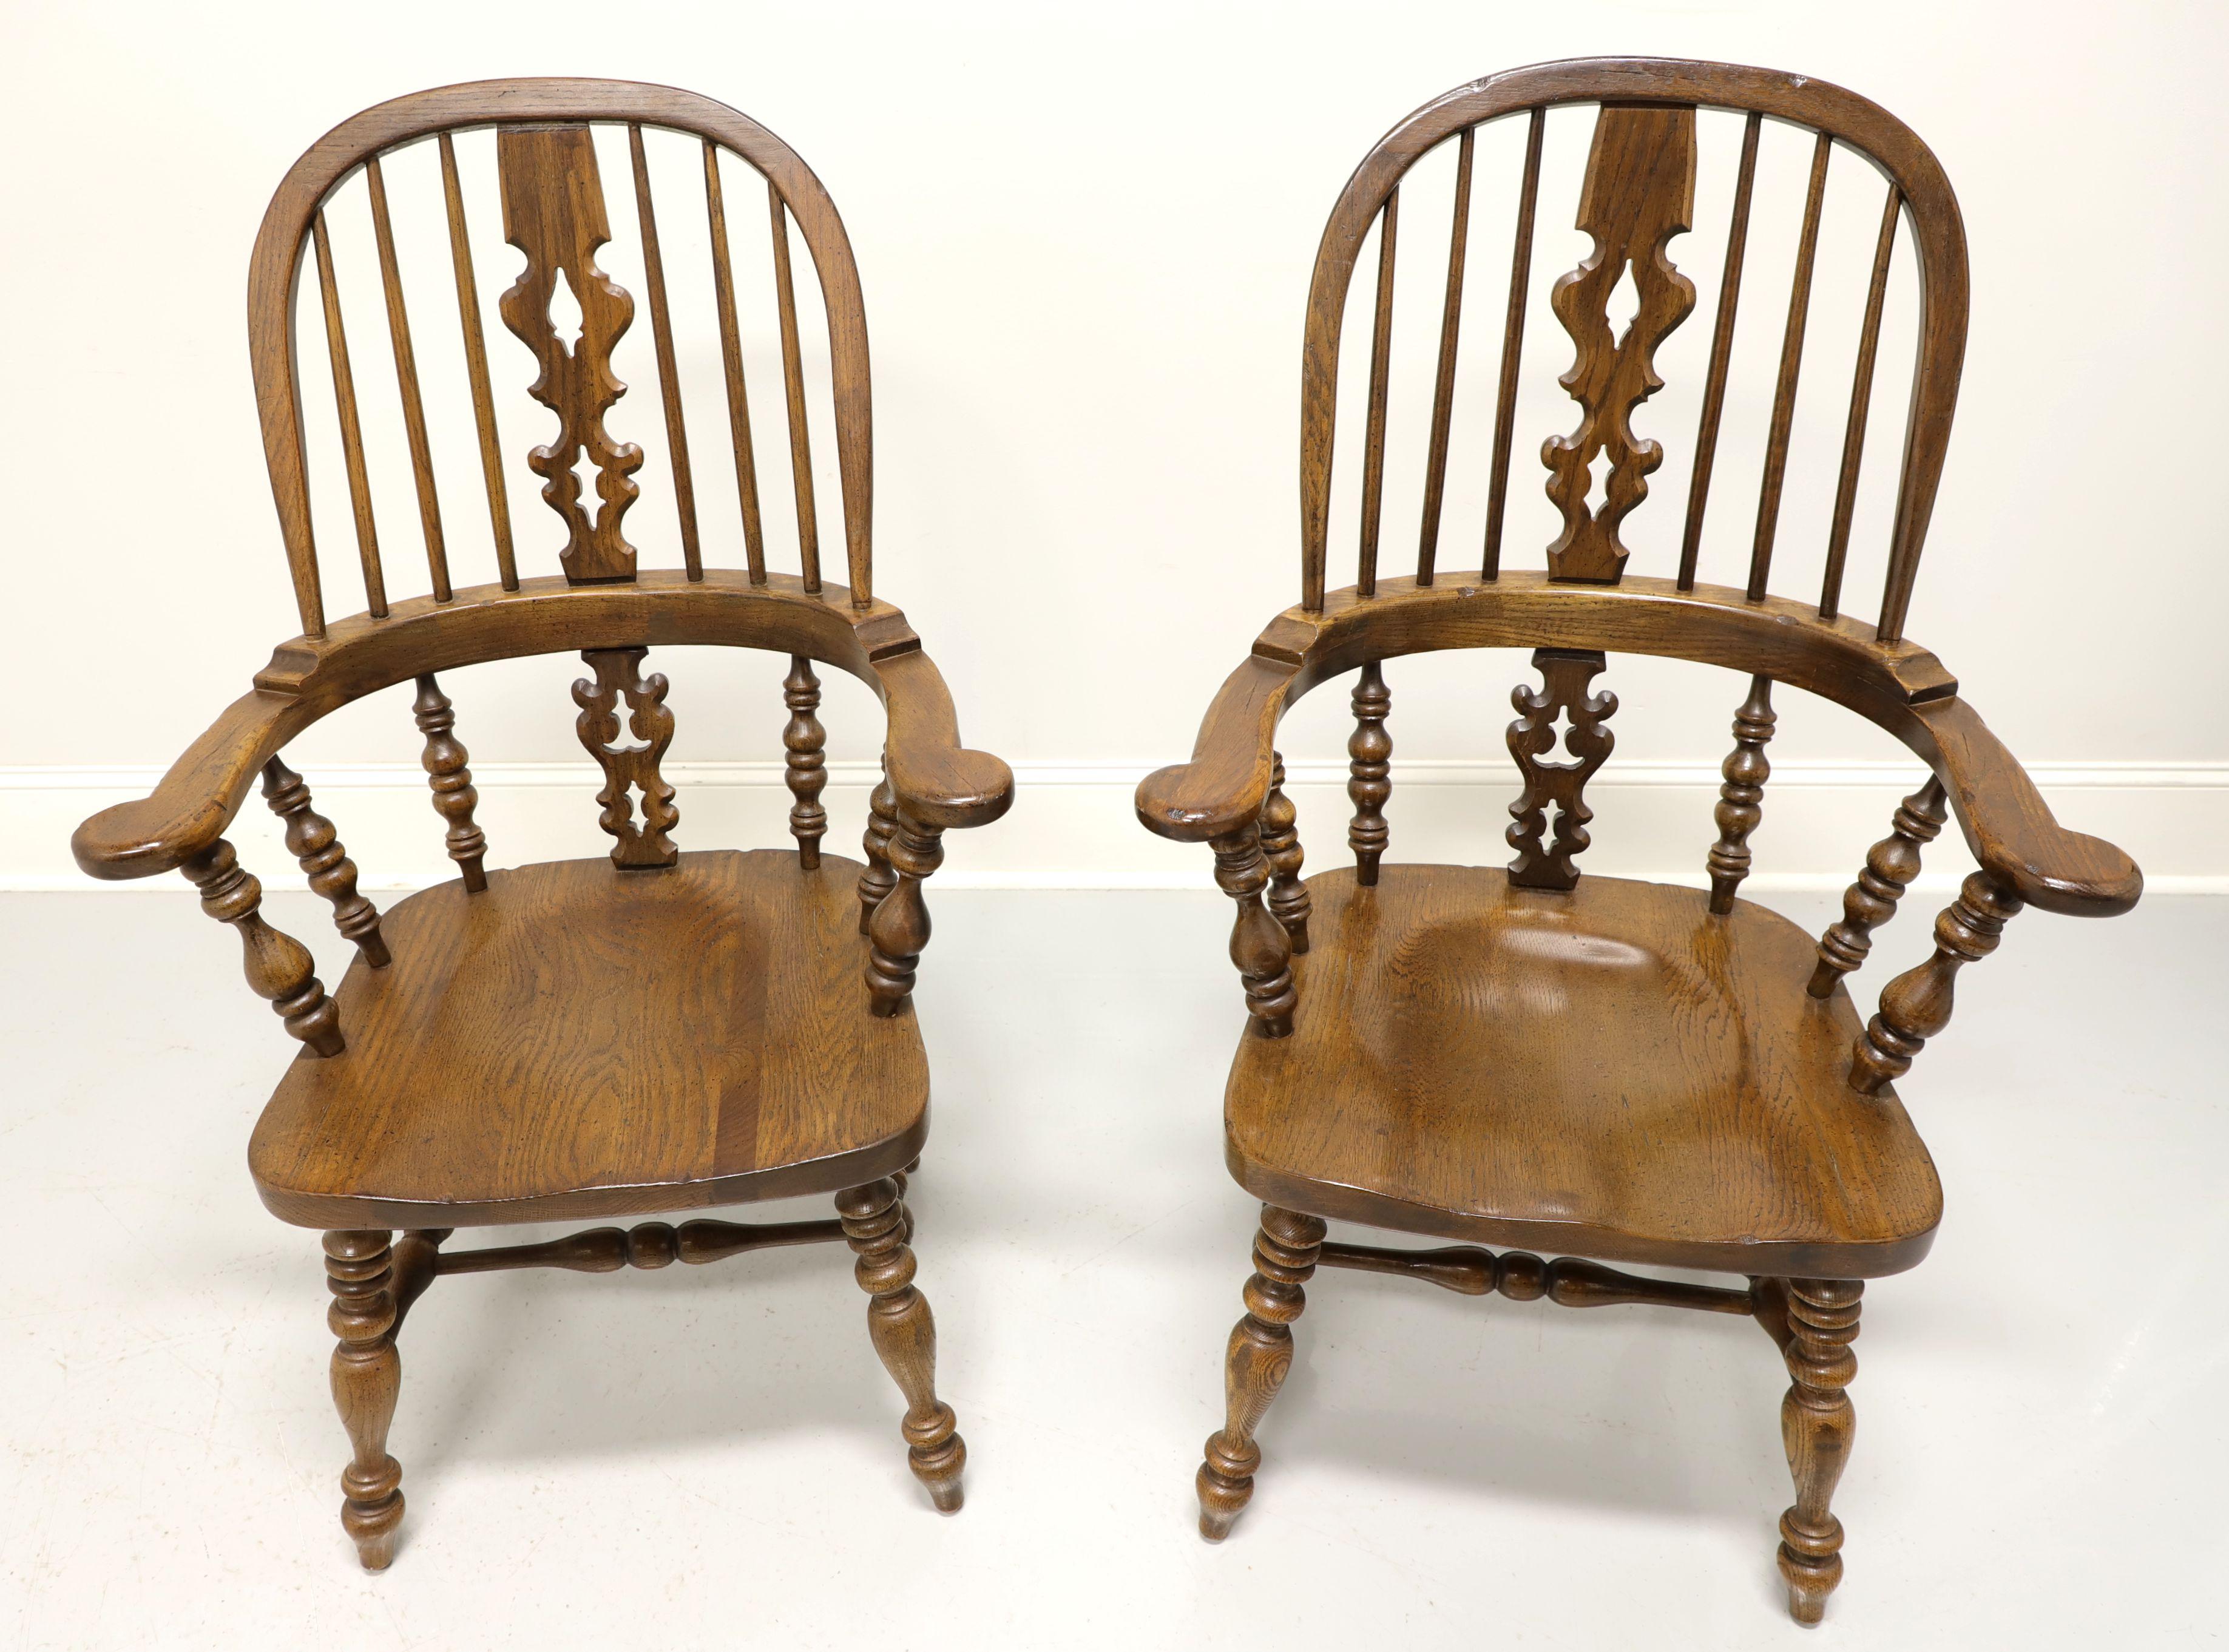 A pair of Windsor style dining armchairs by Ethan Allen, from their Royal Charter collection. Solid oak with bowback, spindle back with carved center backsplat, rounded arms, turned legs and stretchers. Made in the USA, in the late 20th Century.